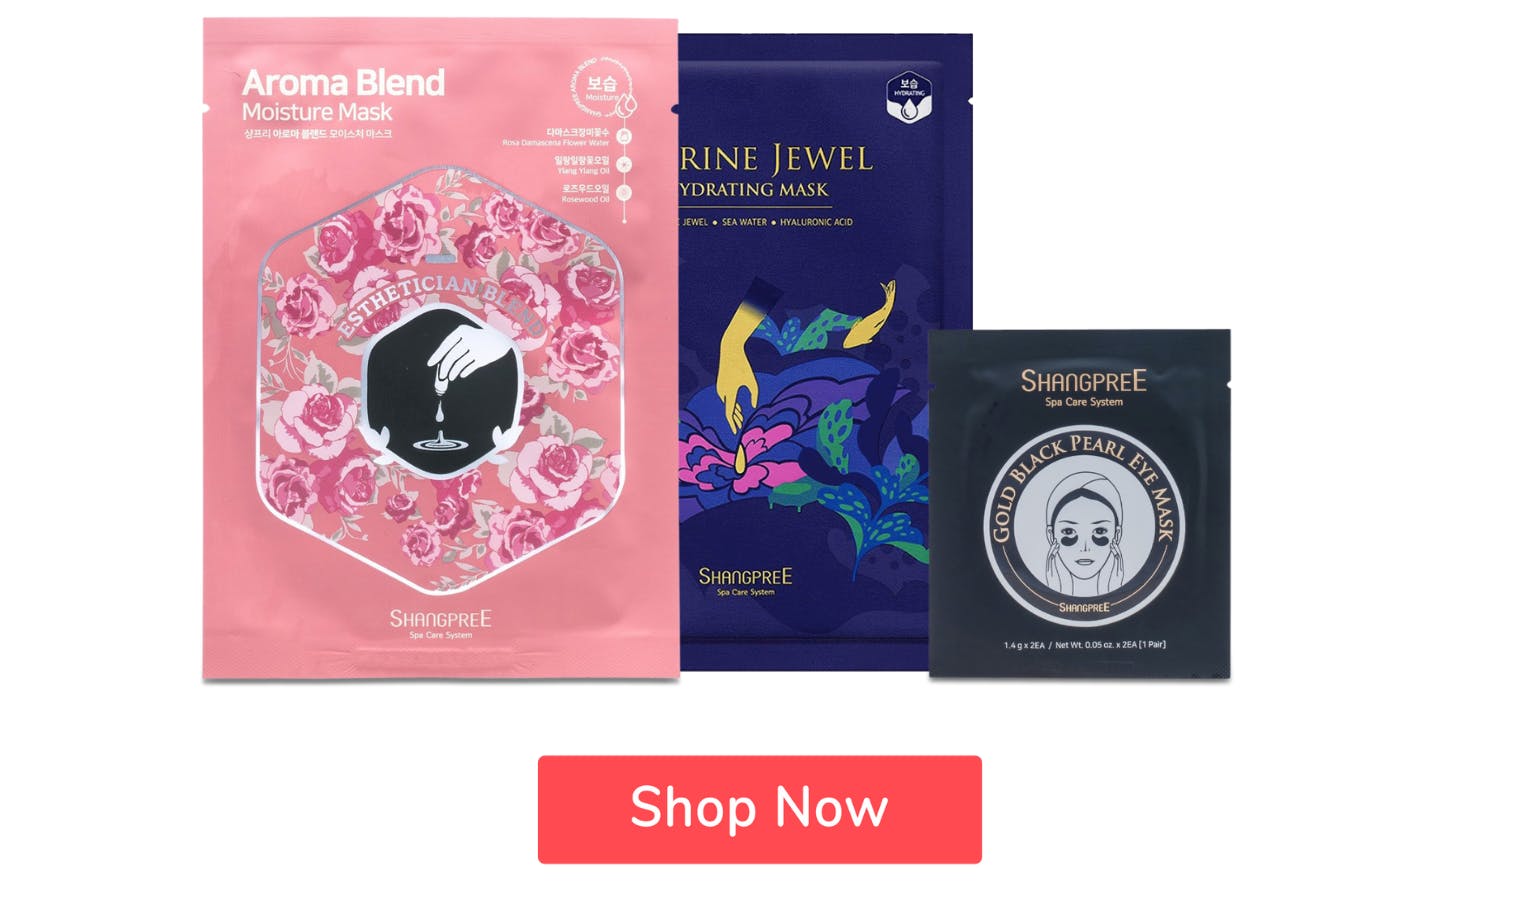 Shangpree korean skincare and a button saying 'shop now'